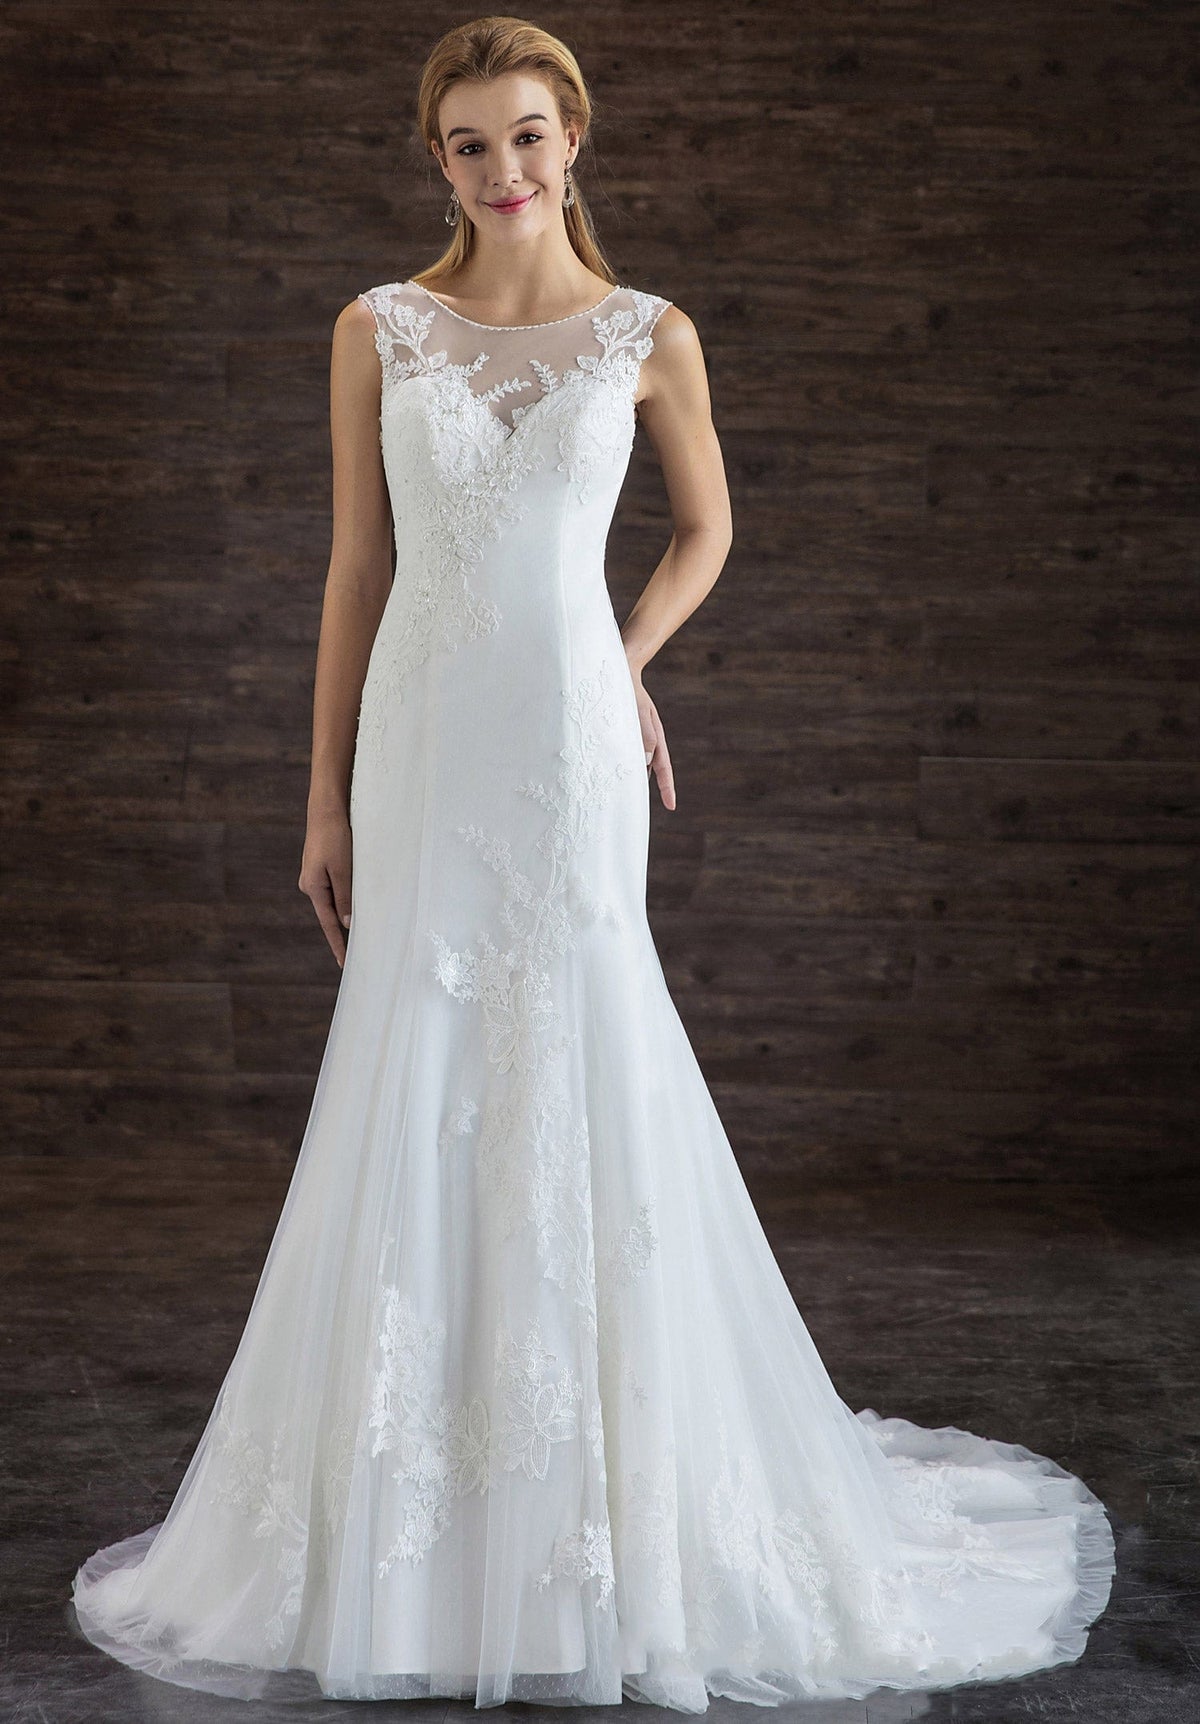 Elegant Illusion Neck With Floral Lace Mermaid Wedding Dress As Picture